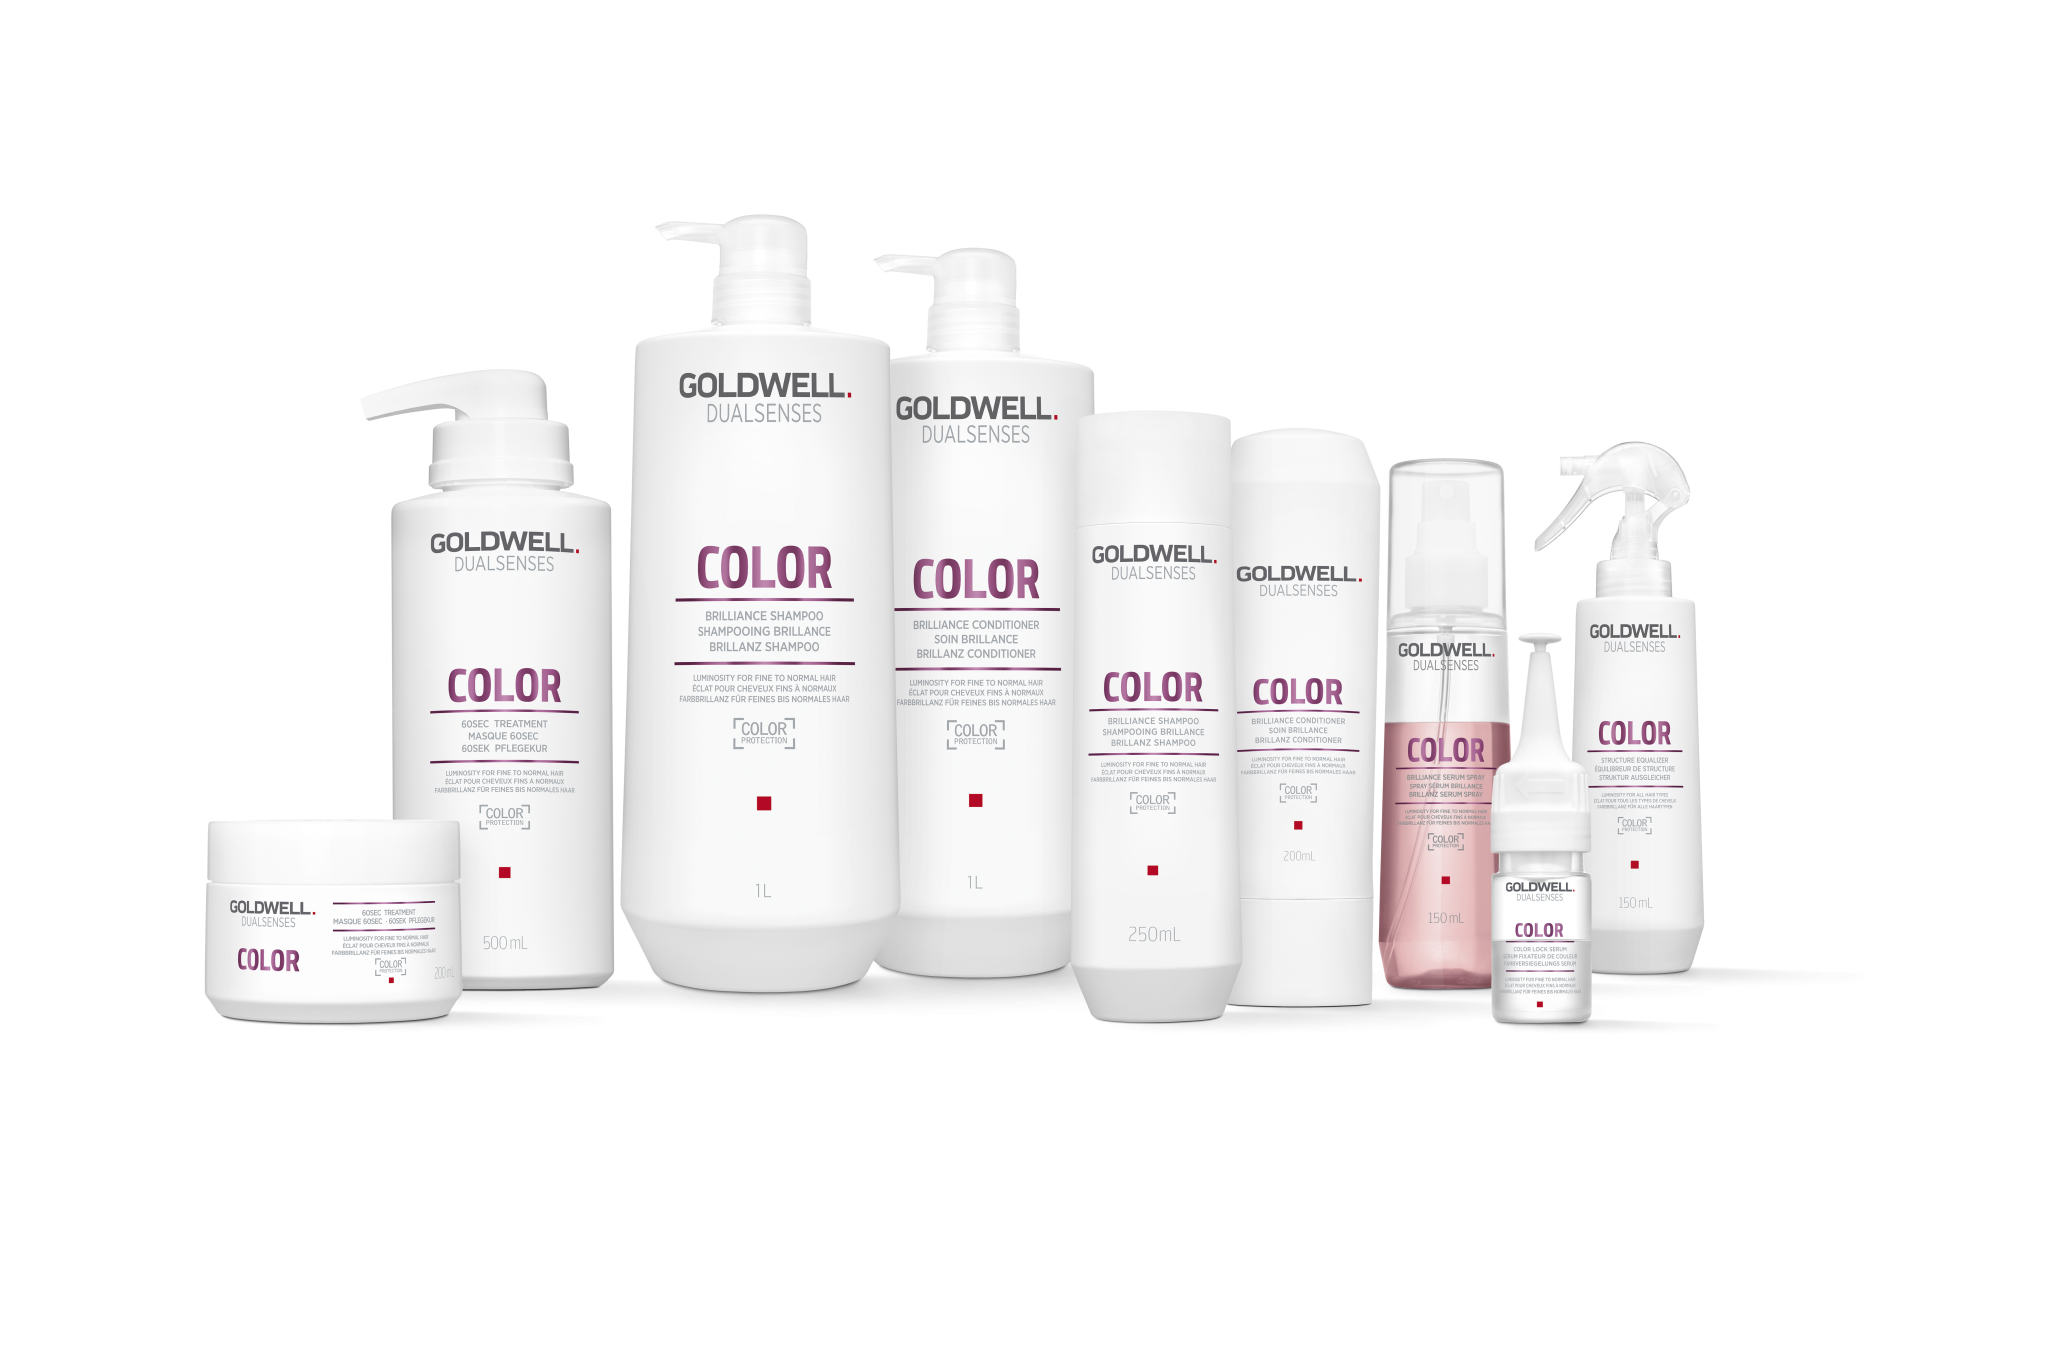 Goldwell Color Range is a favourite product of Holly